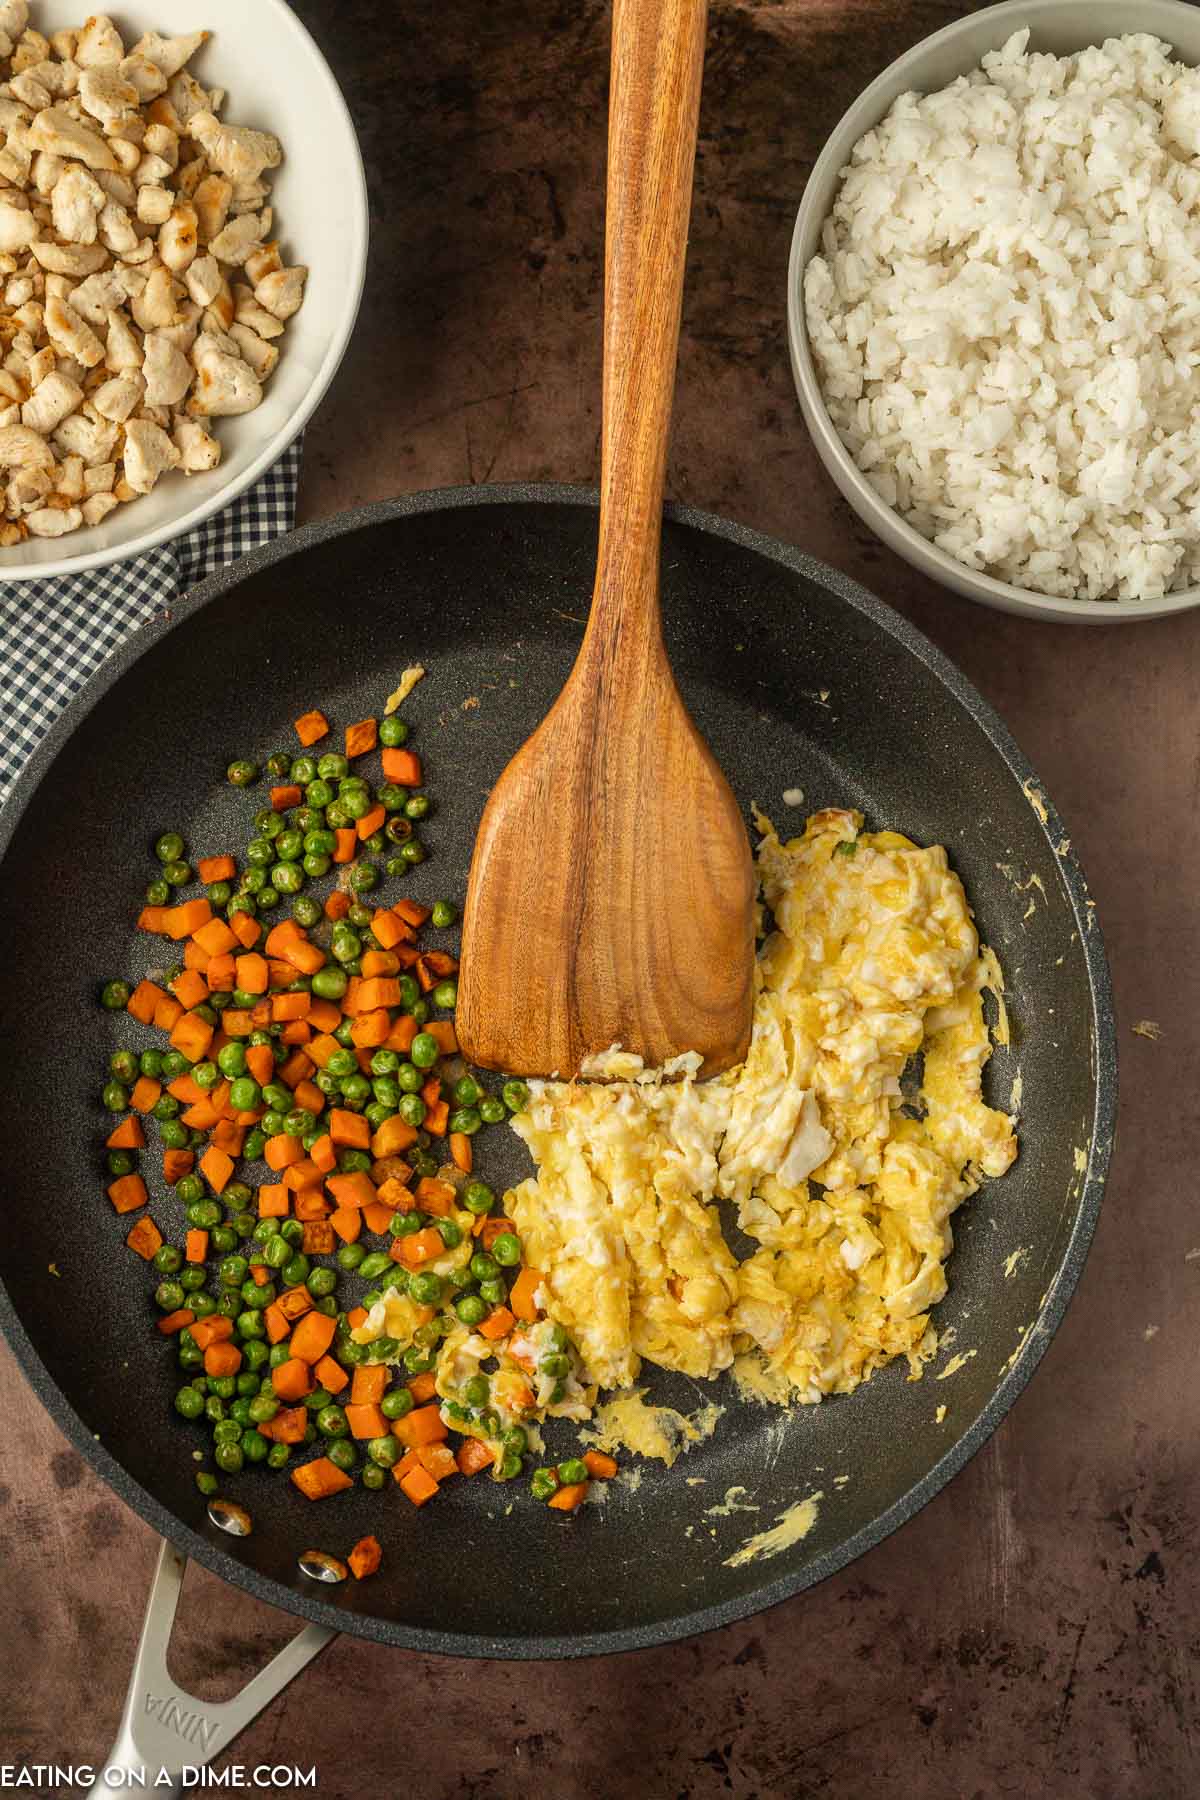 Cooking the vegetables and scrambling eggs in a skillet with a wooden spoon